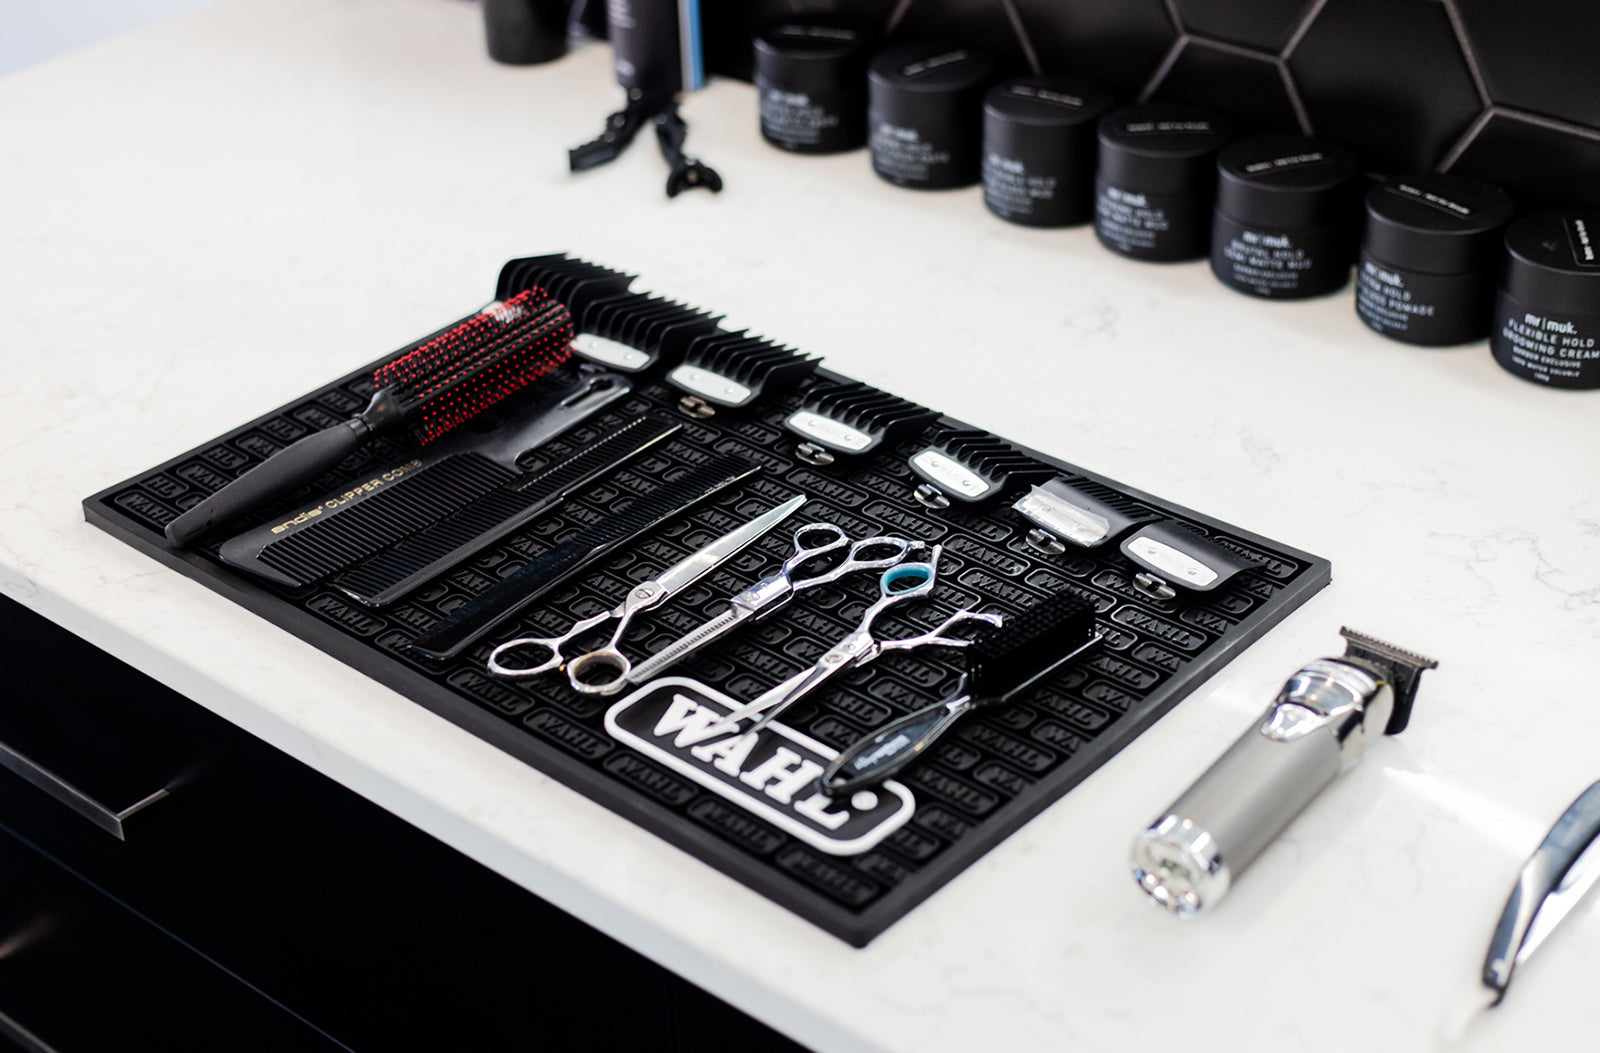 State of the art barbering tools used to perfect all types of haircuts